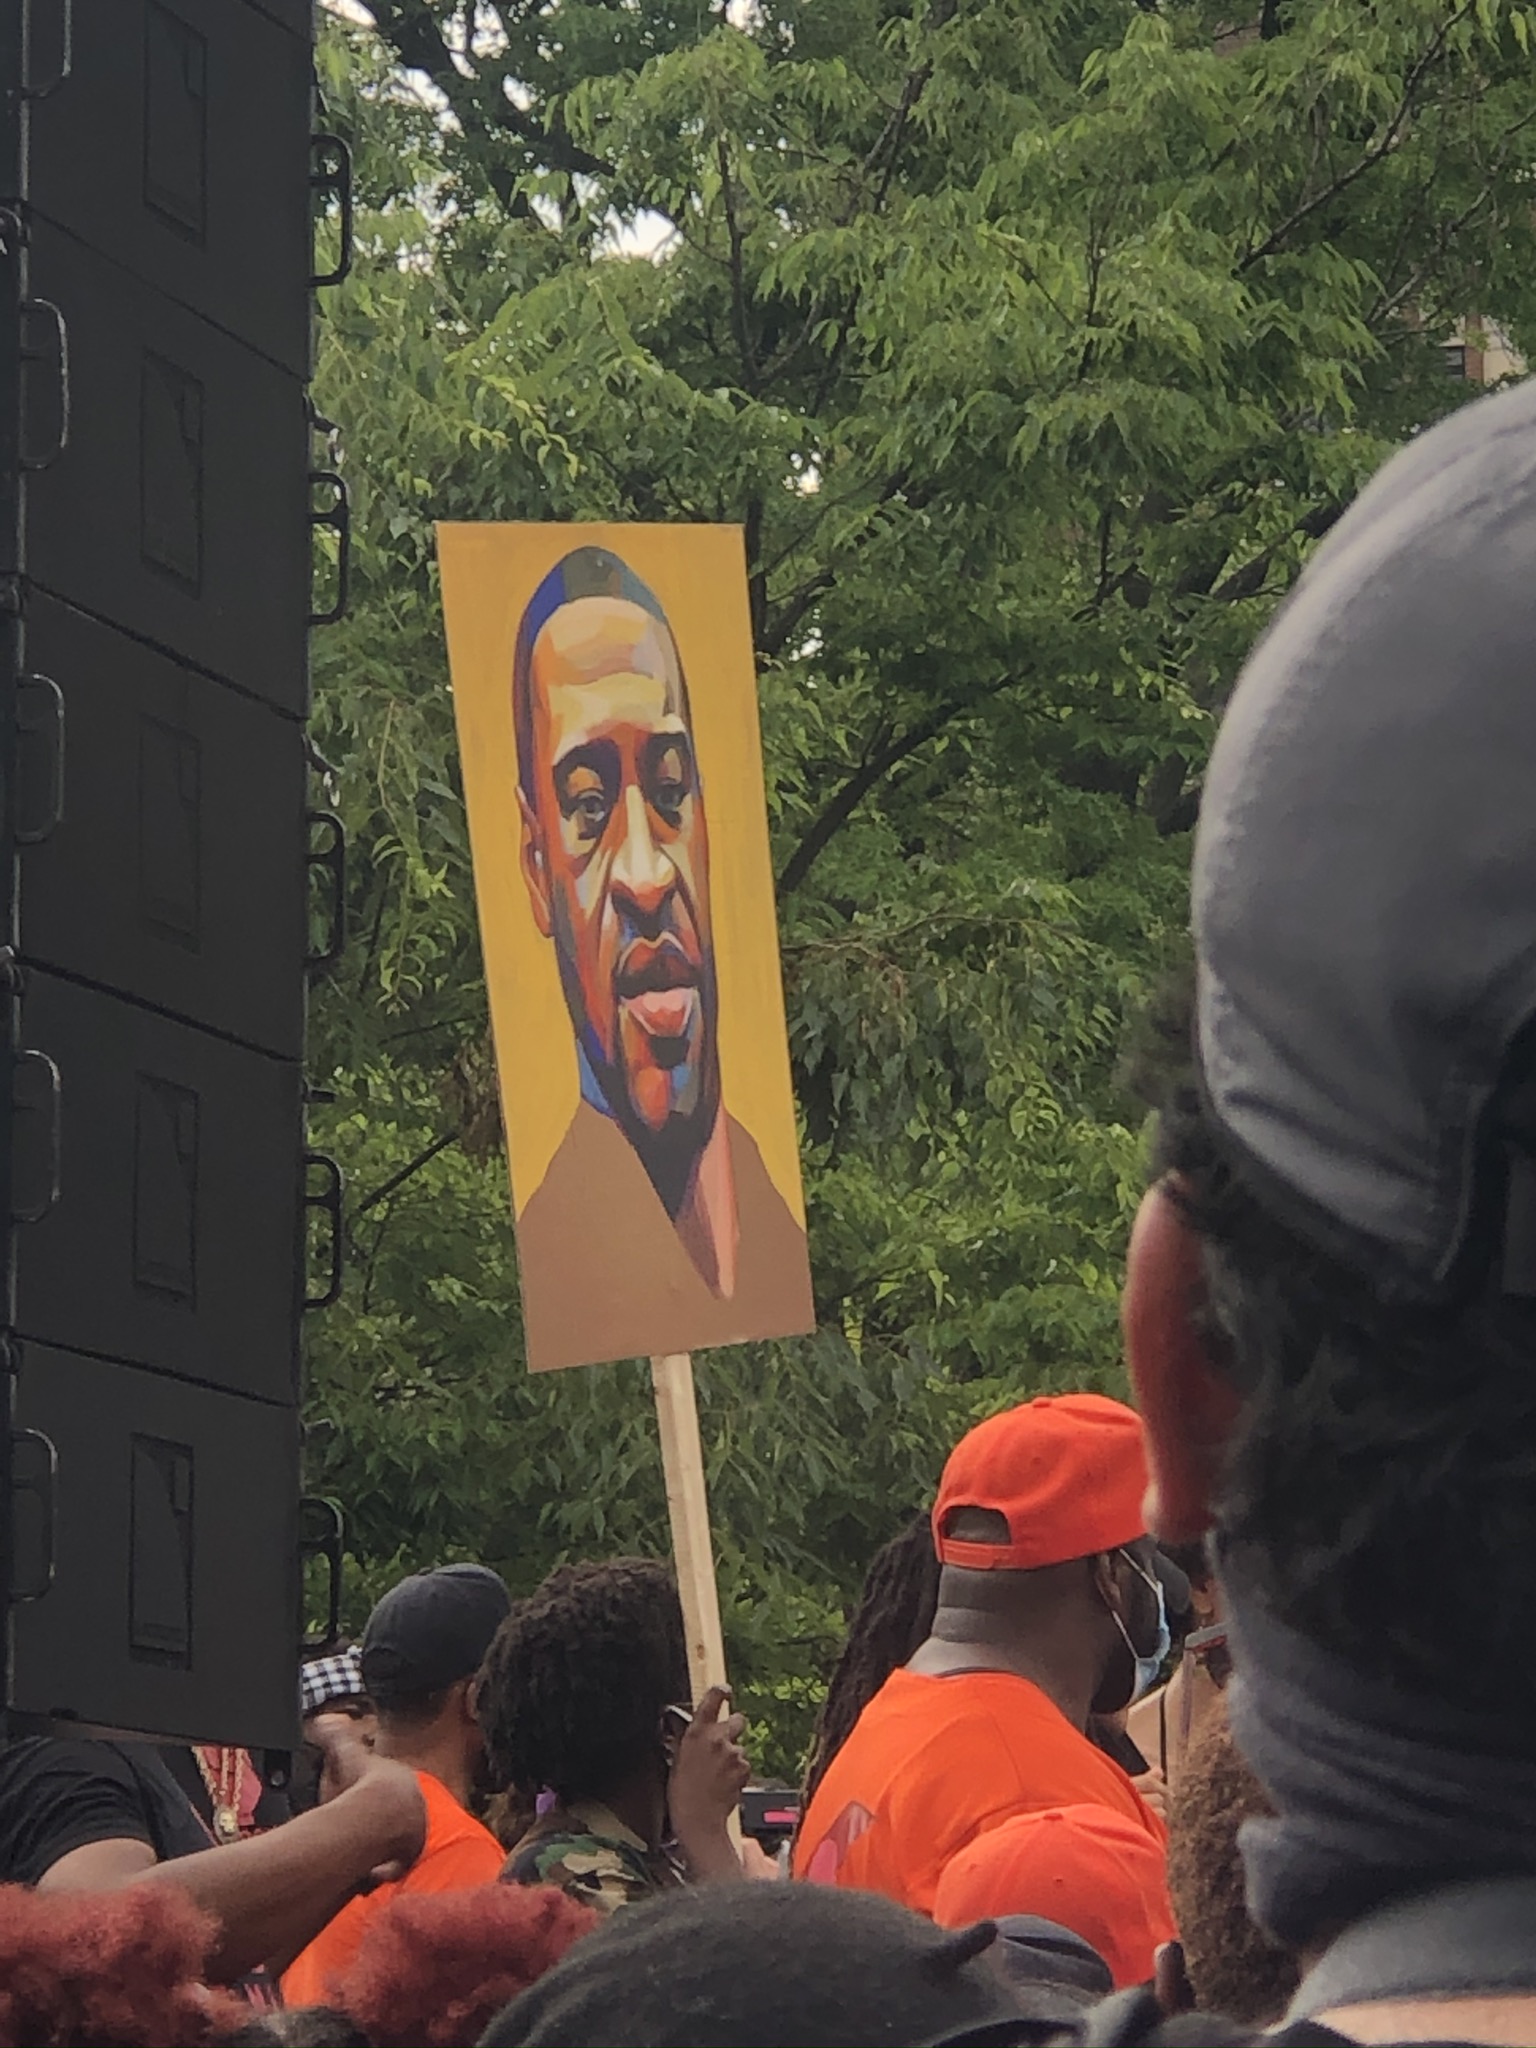 The March for Stolen Lives and Looted Dreams; NYC, June 6, 2020